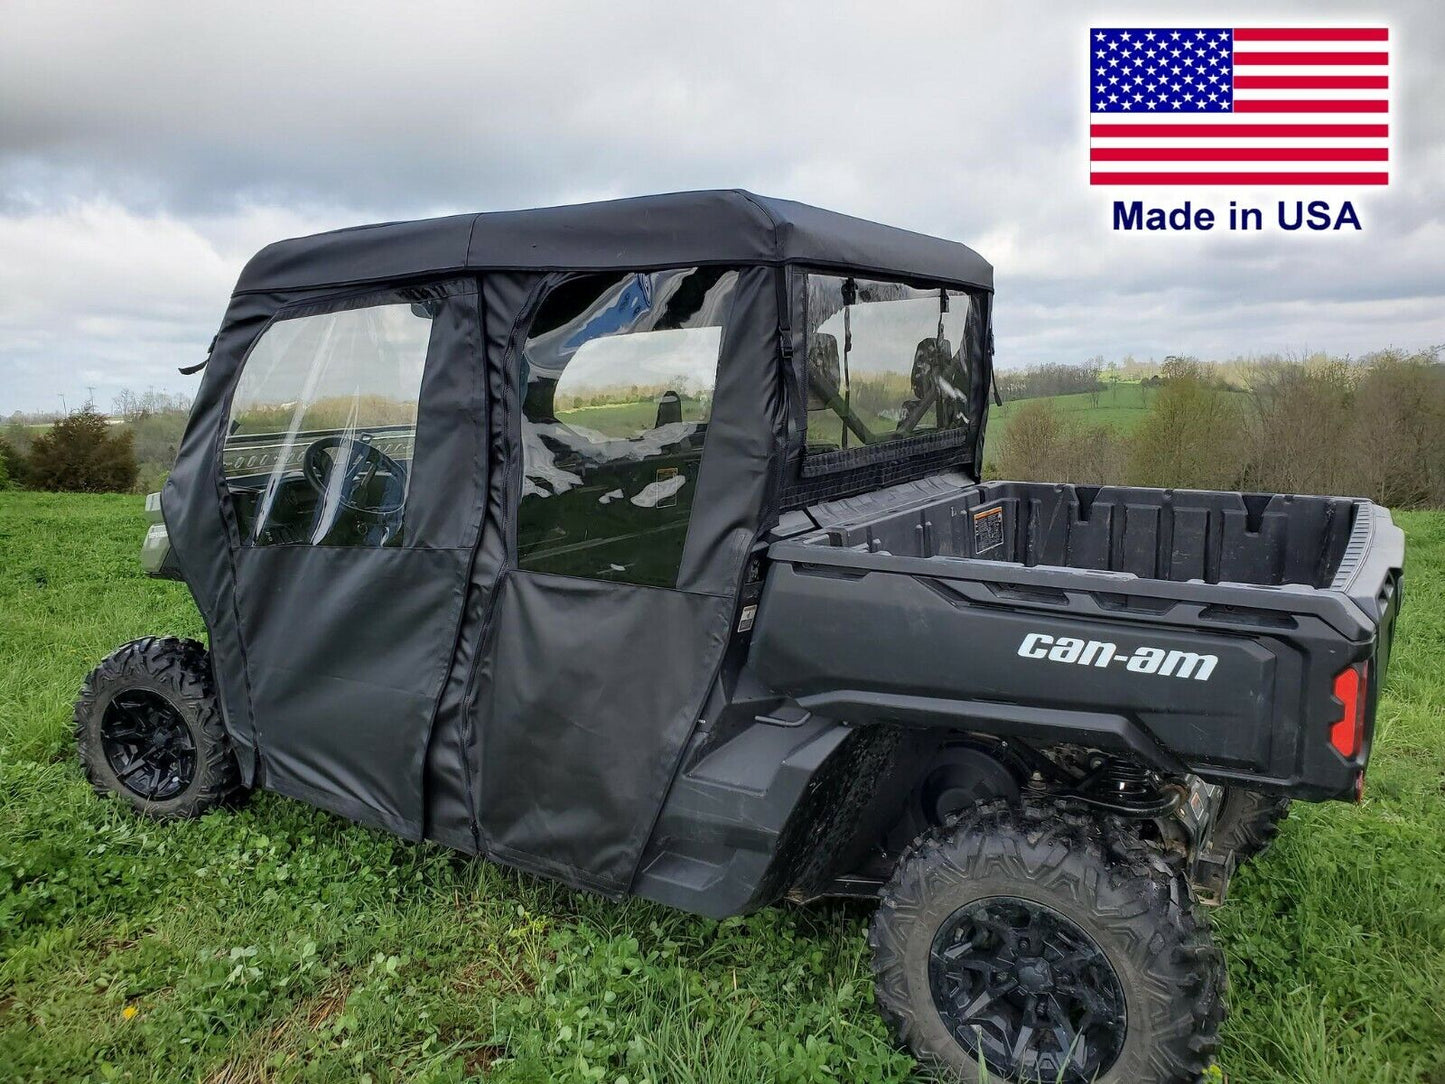 DOORS, REAR WINDOW, and ROOF for Can Am Defender Max - Soft Material